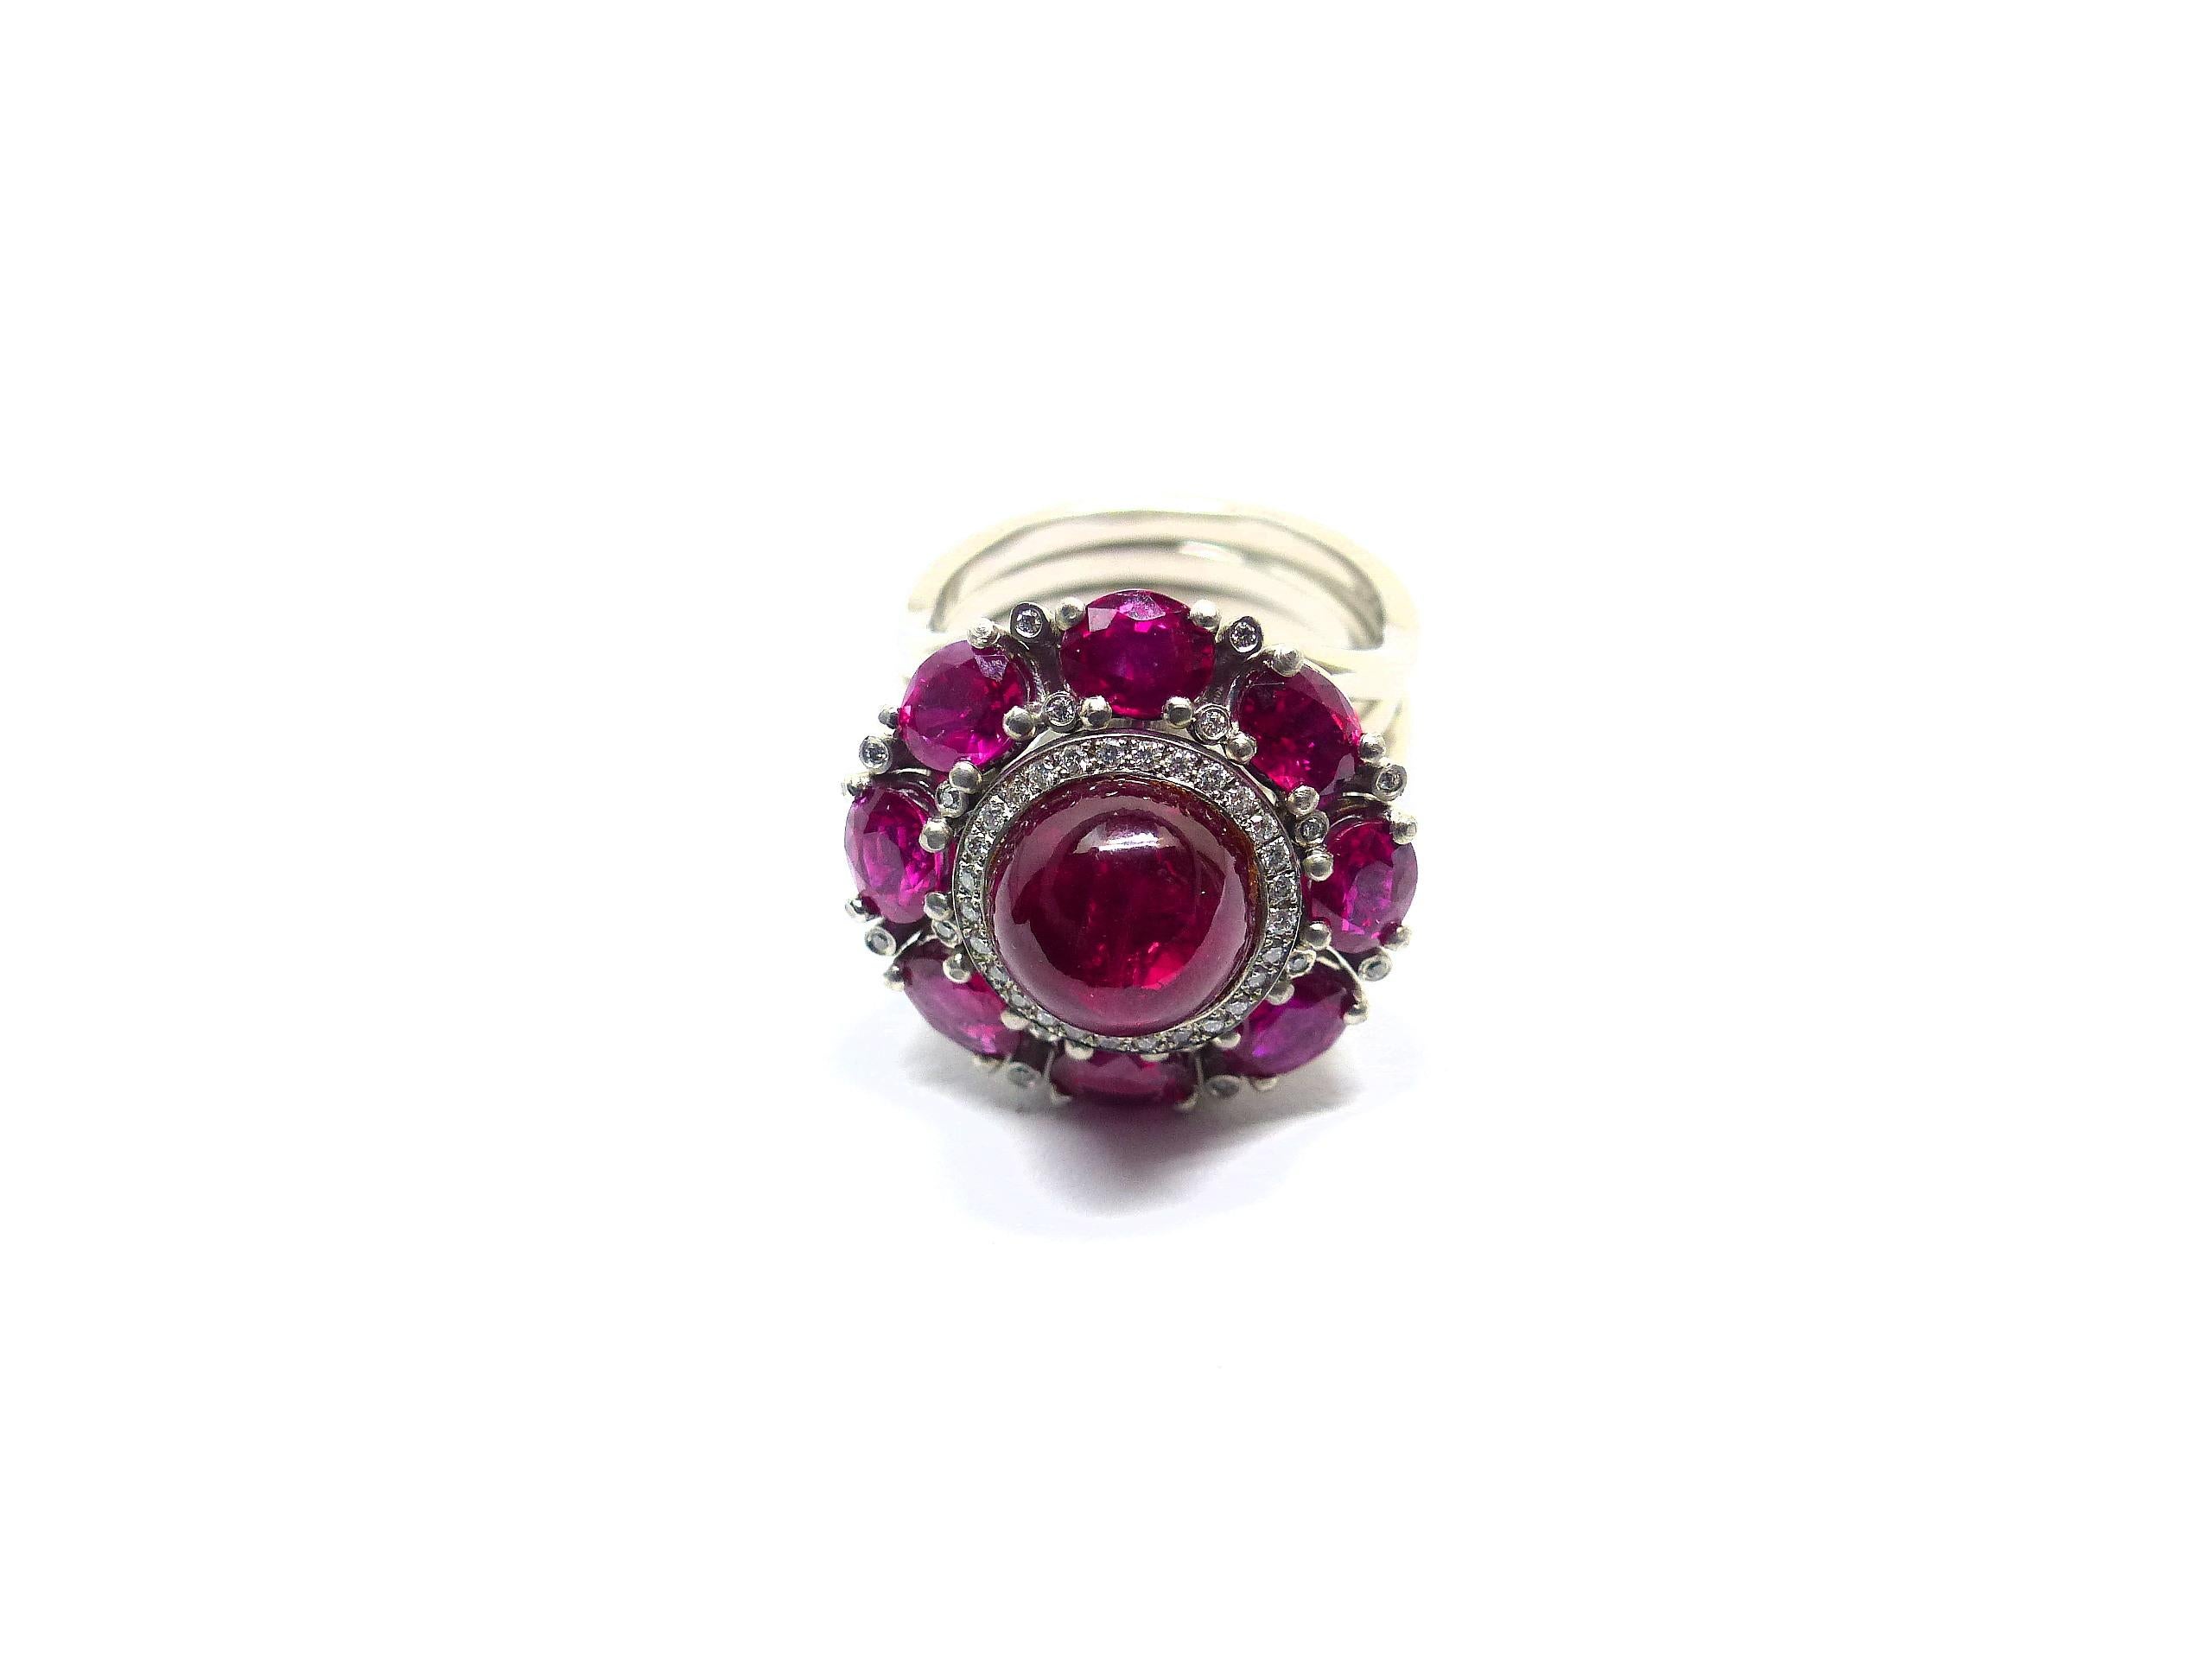 Thomas Leyser is renowned for his contemporary jewellery designs utilizing fine gemstones.

This 950/ Platinum (22gr.) Ring with 1 Ruby Cabouchon in excellent quality, 9,5mm round, 6,00cts. + 8 Rubies in excellent quality, oval 5x4mm, 3,51cts. + 44